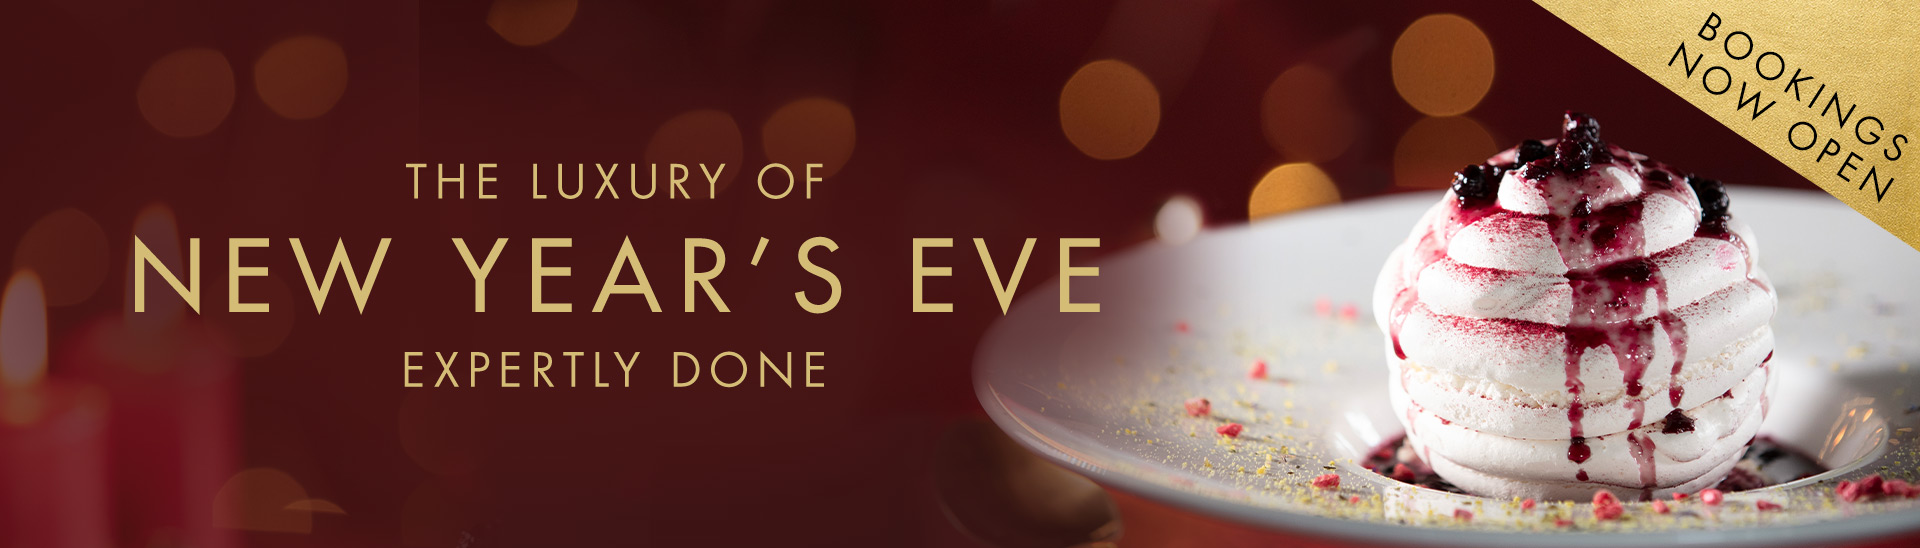 New Year’s Eve Menu at Miller & Carter Salfords • Book Now